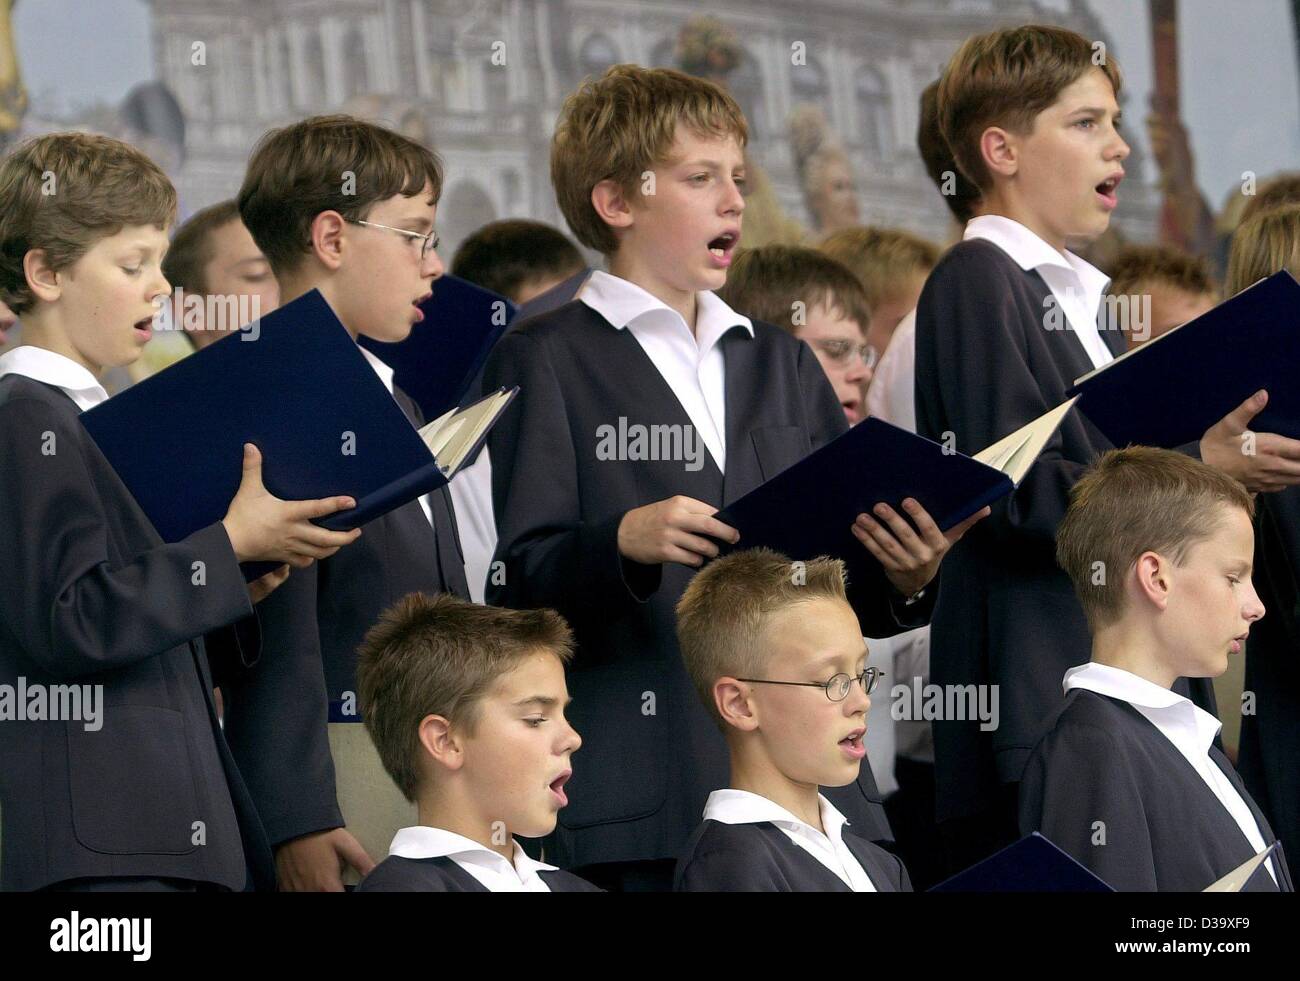 (dpa files) - The boys of the Kreuzchor (cross choir) of Dresden sing during a concert in Dresden, Germany, 18 August 2001. The history of the boys choir goes back to the 13th century. Today, 140 'Crucians' from the age of 9 to 19 sing in the choir. Stock Photo